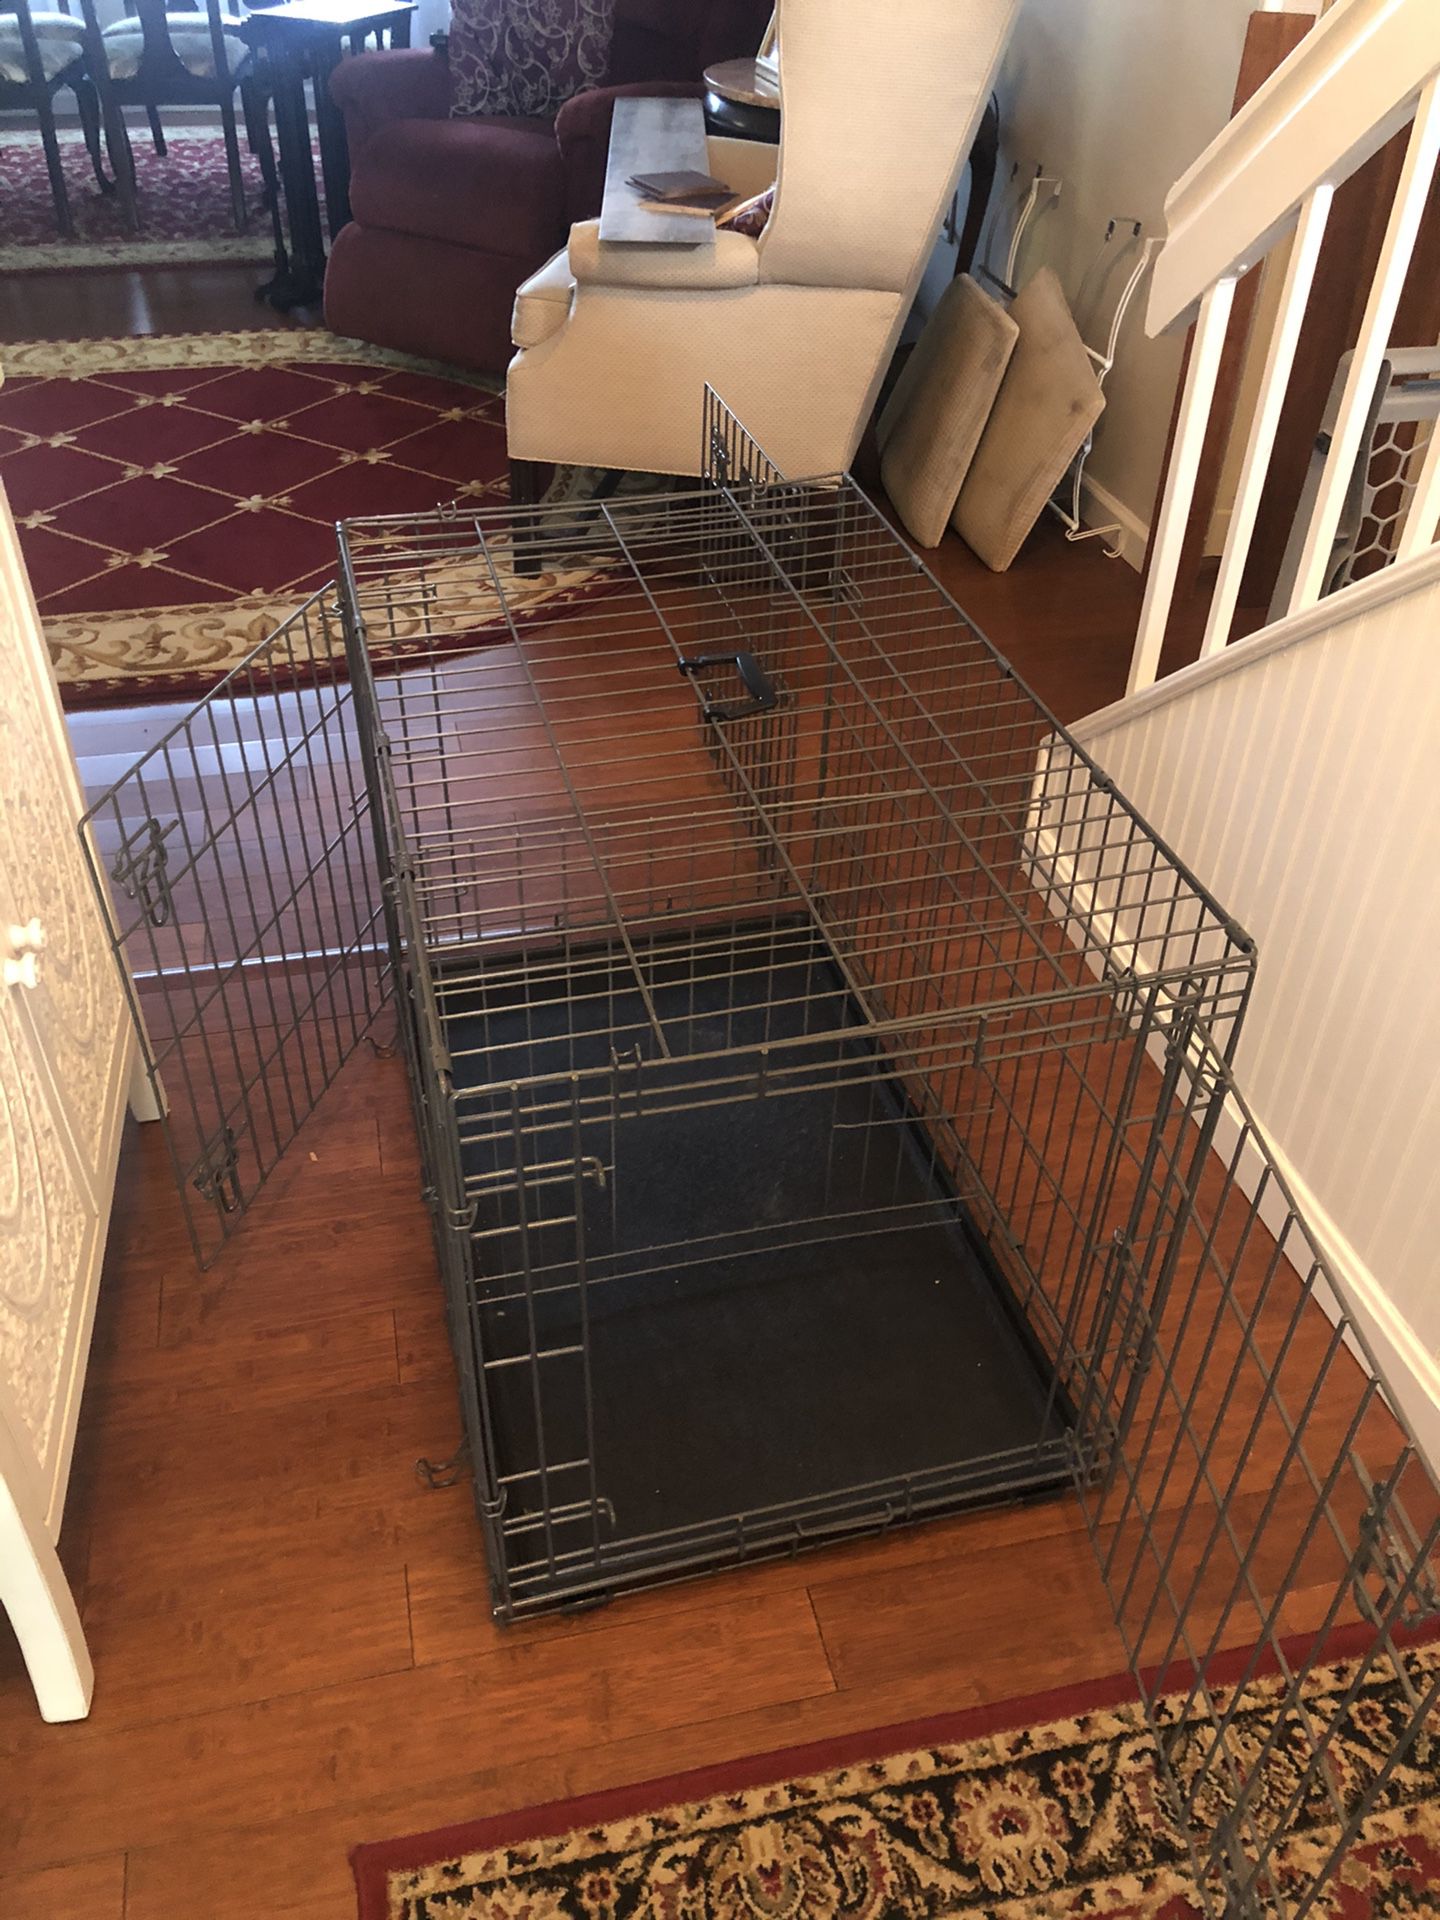 REDUCED Puppy Apartment Dog kennel/crate/cage